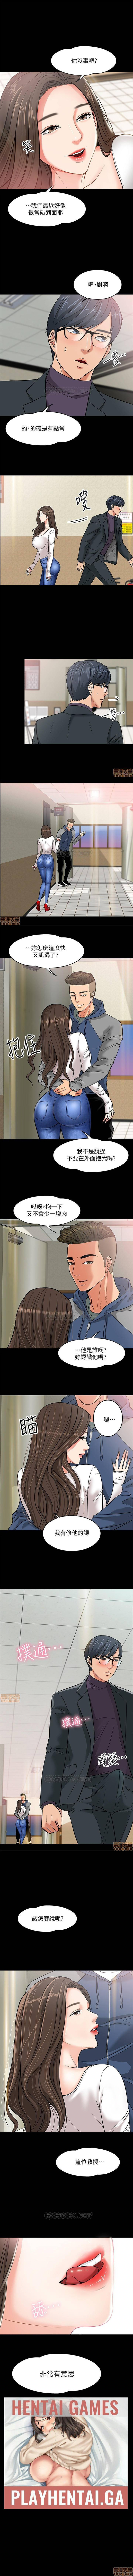 PROFESSOR, ARE YOU JUST GOING TO LOOK AT ME? | DESIRE SWAMP | 教授，你還等什麼? Ch. 2 [Chinese] Manhwa 